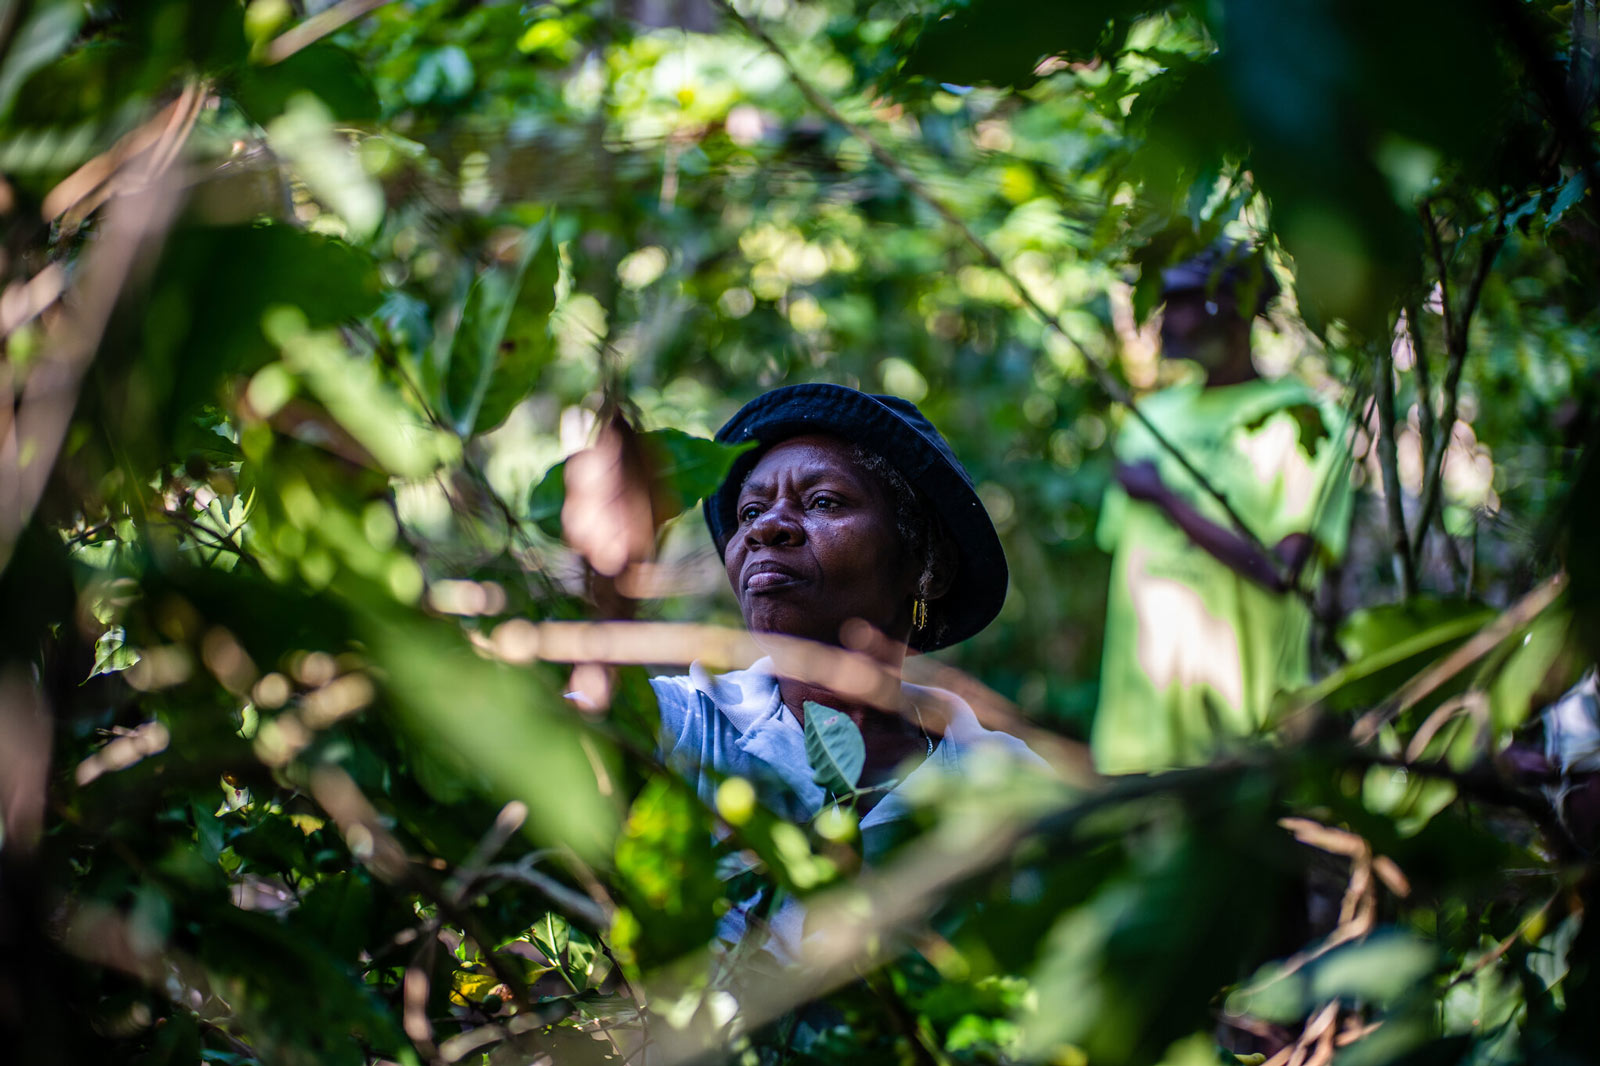 Ms. Present harvesting her coffee beans. 